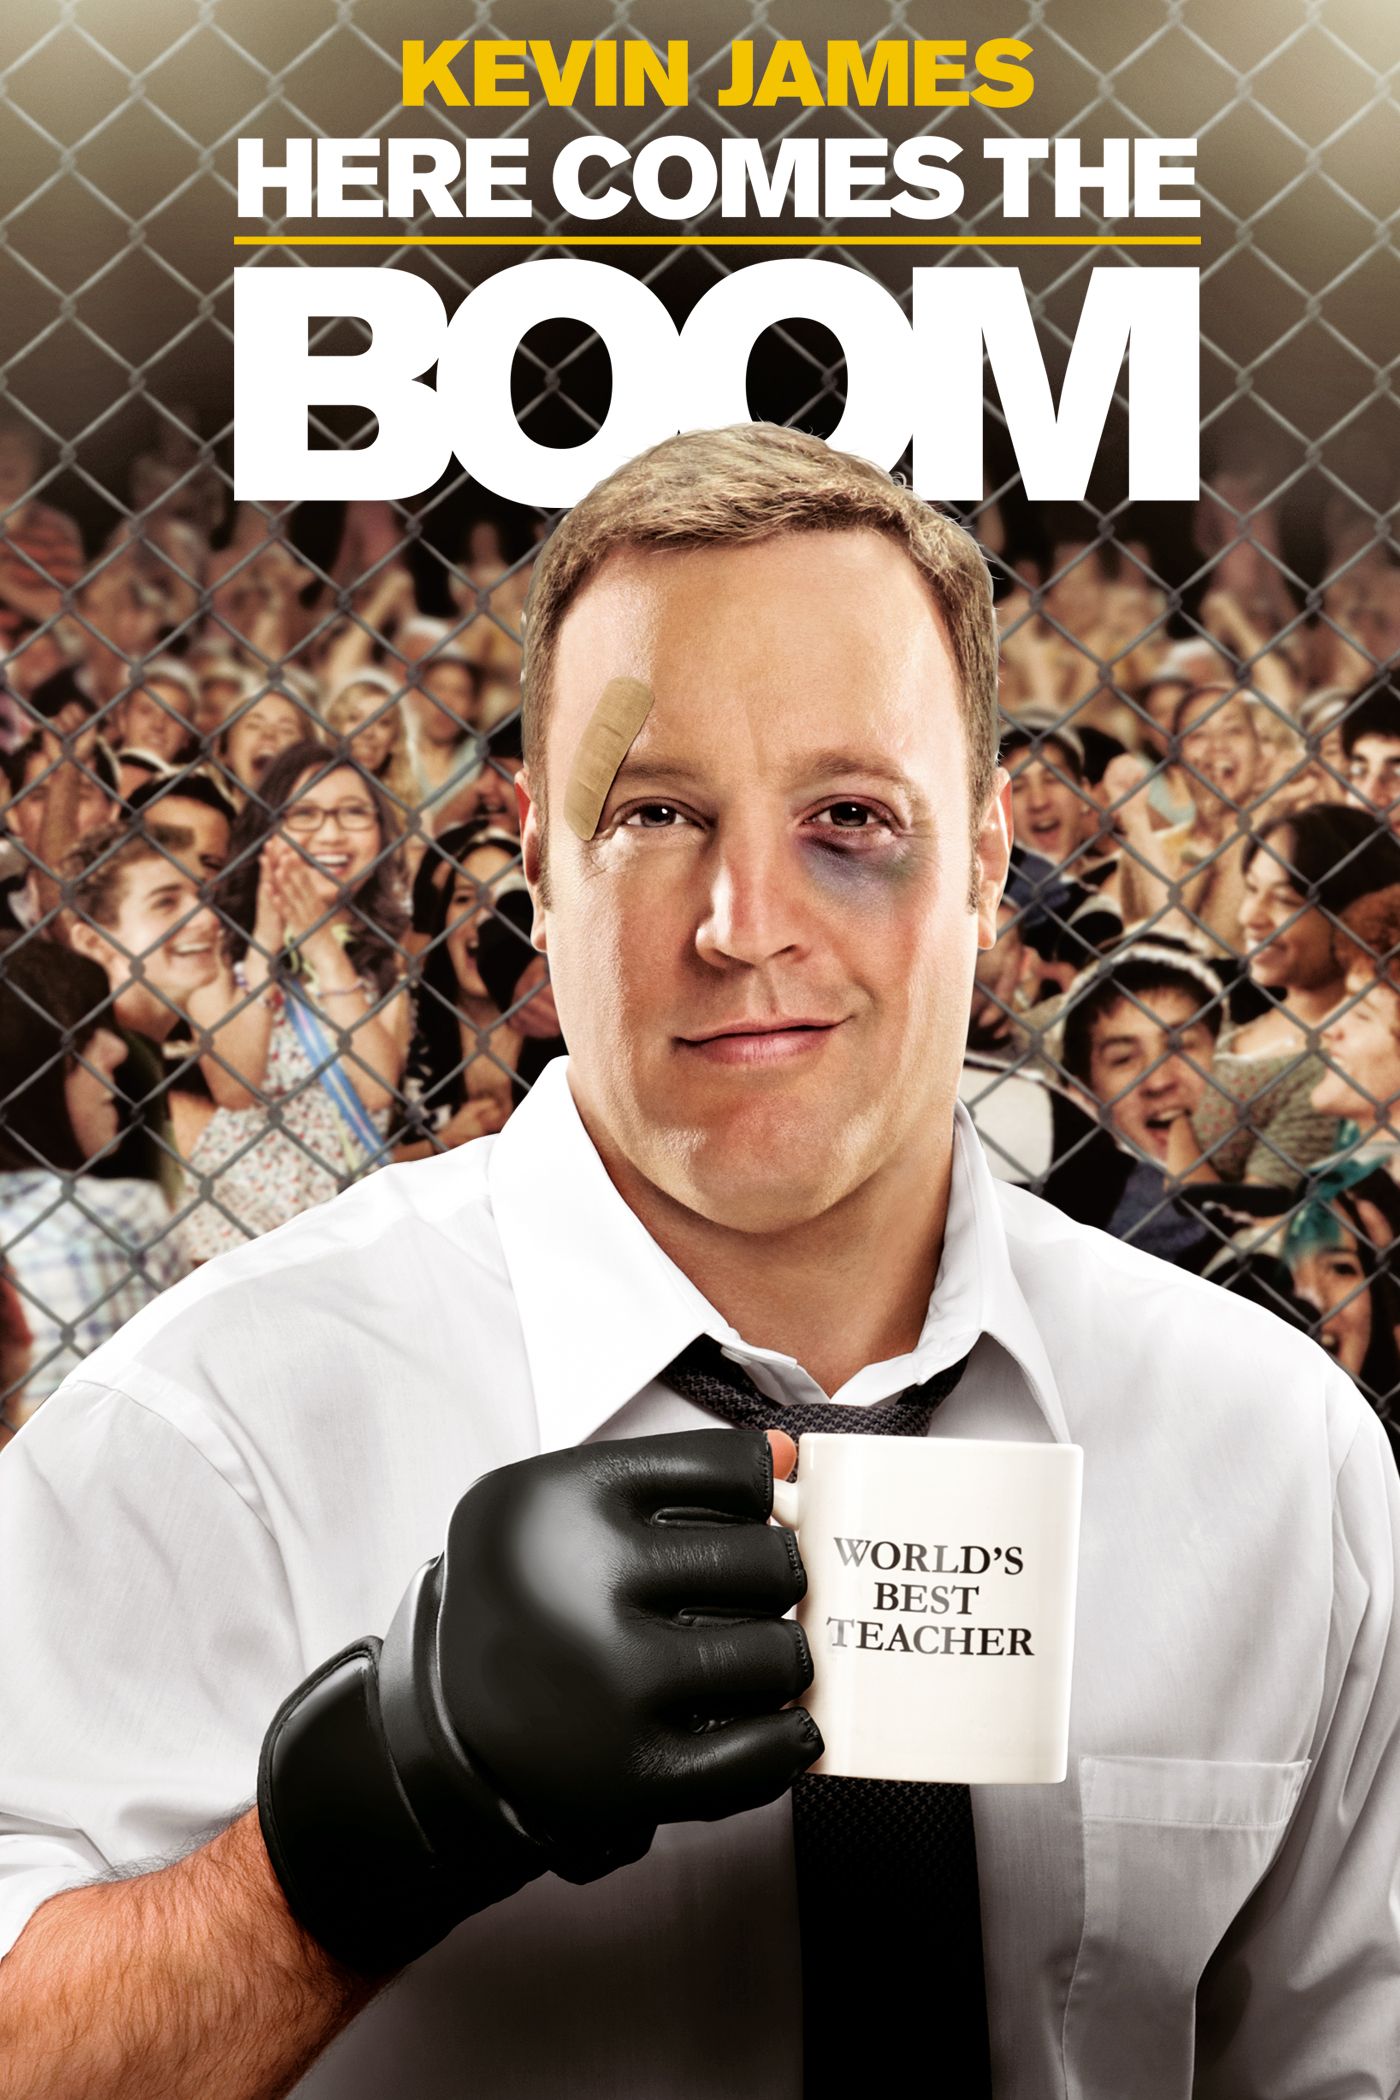 Henry Winkler, here Comes The Boom, kevin James, columbia, film